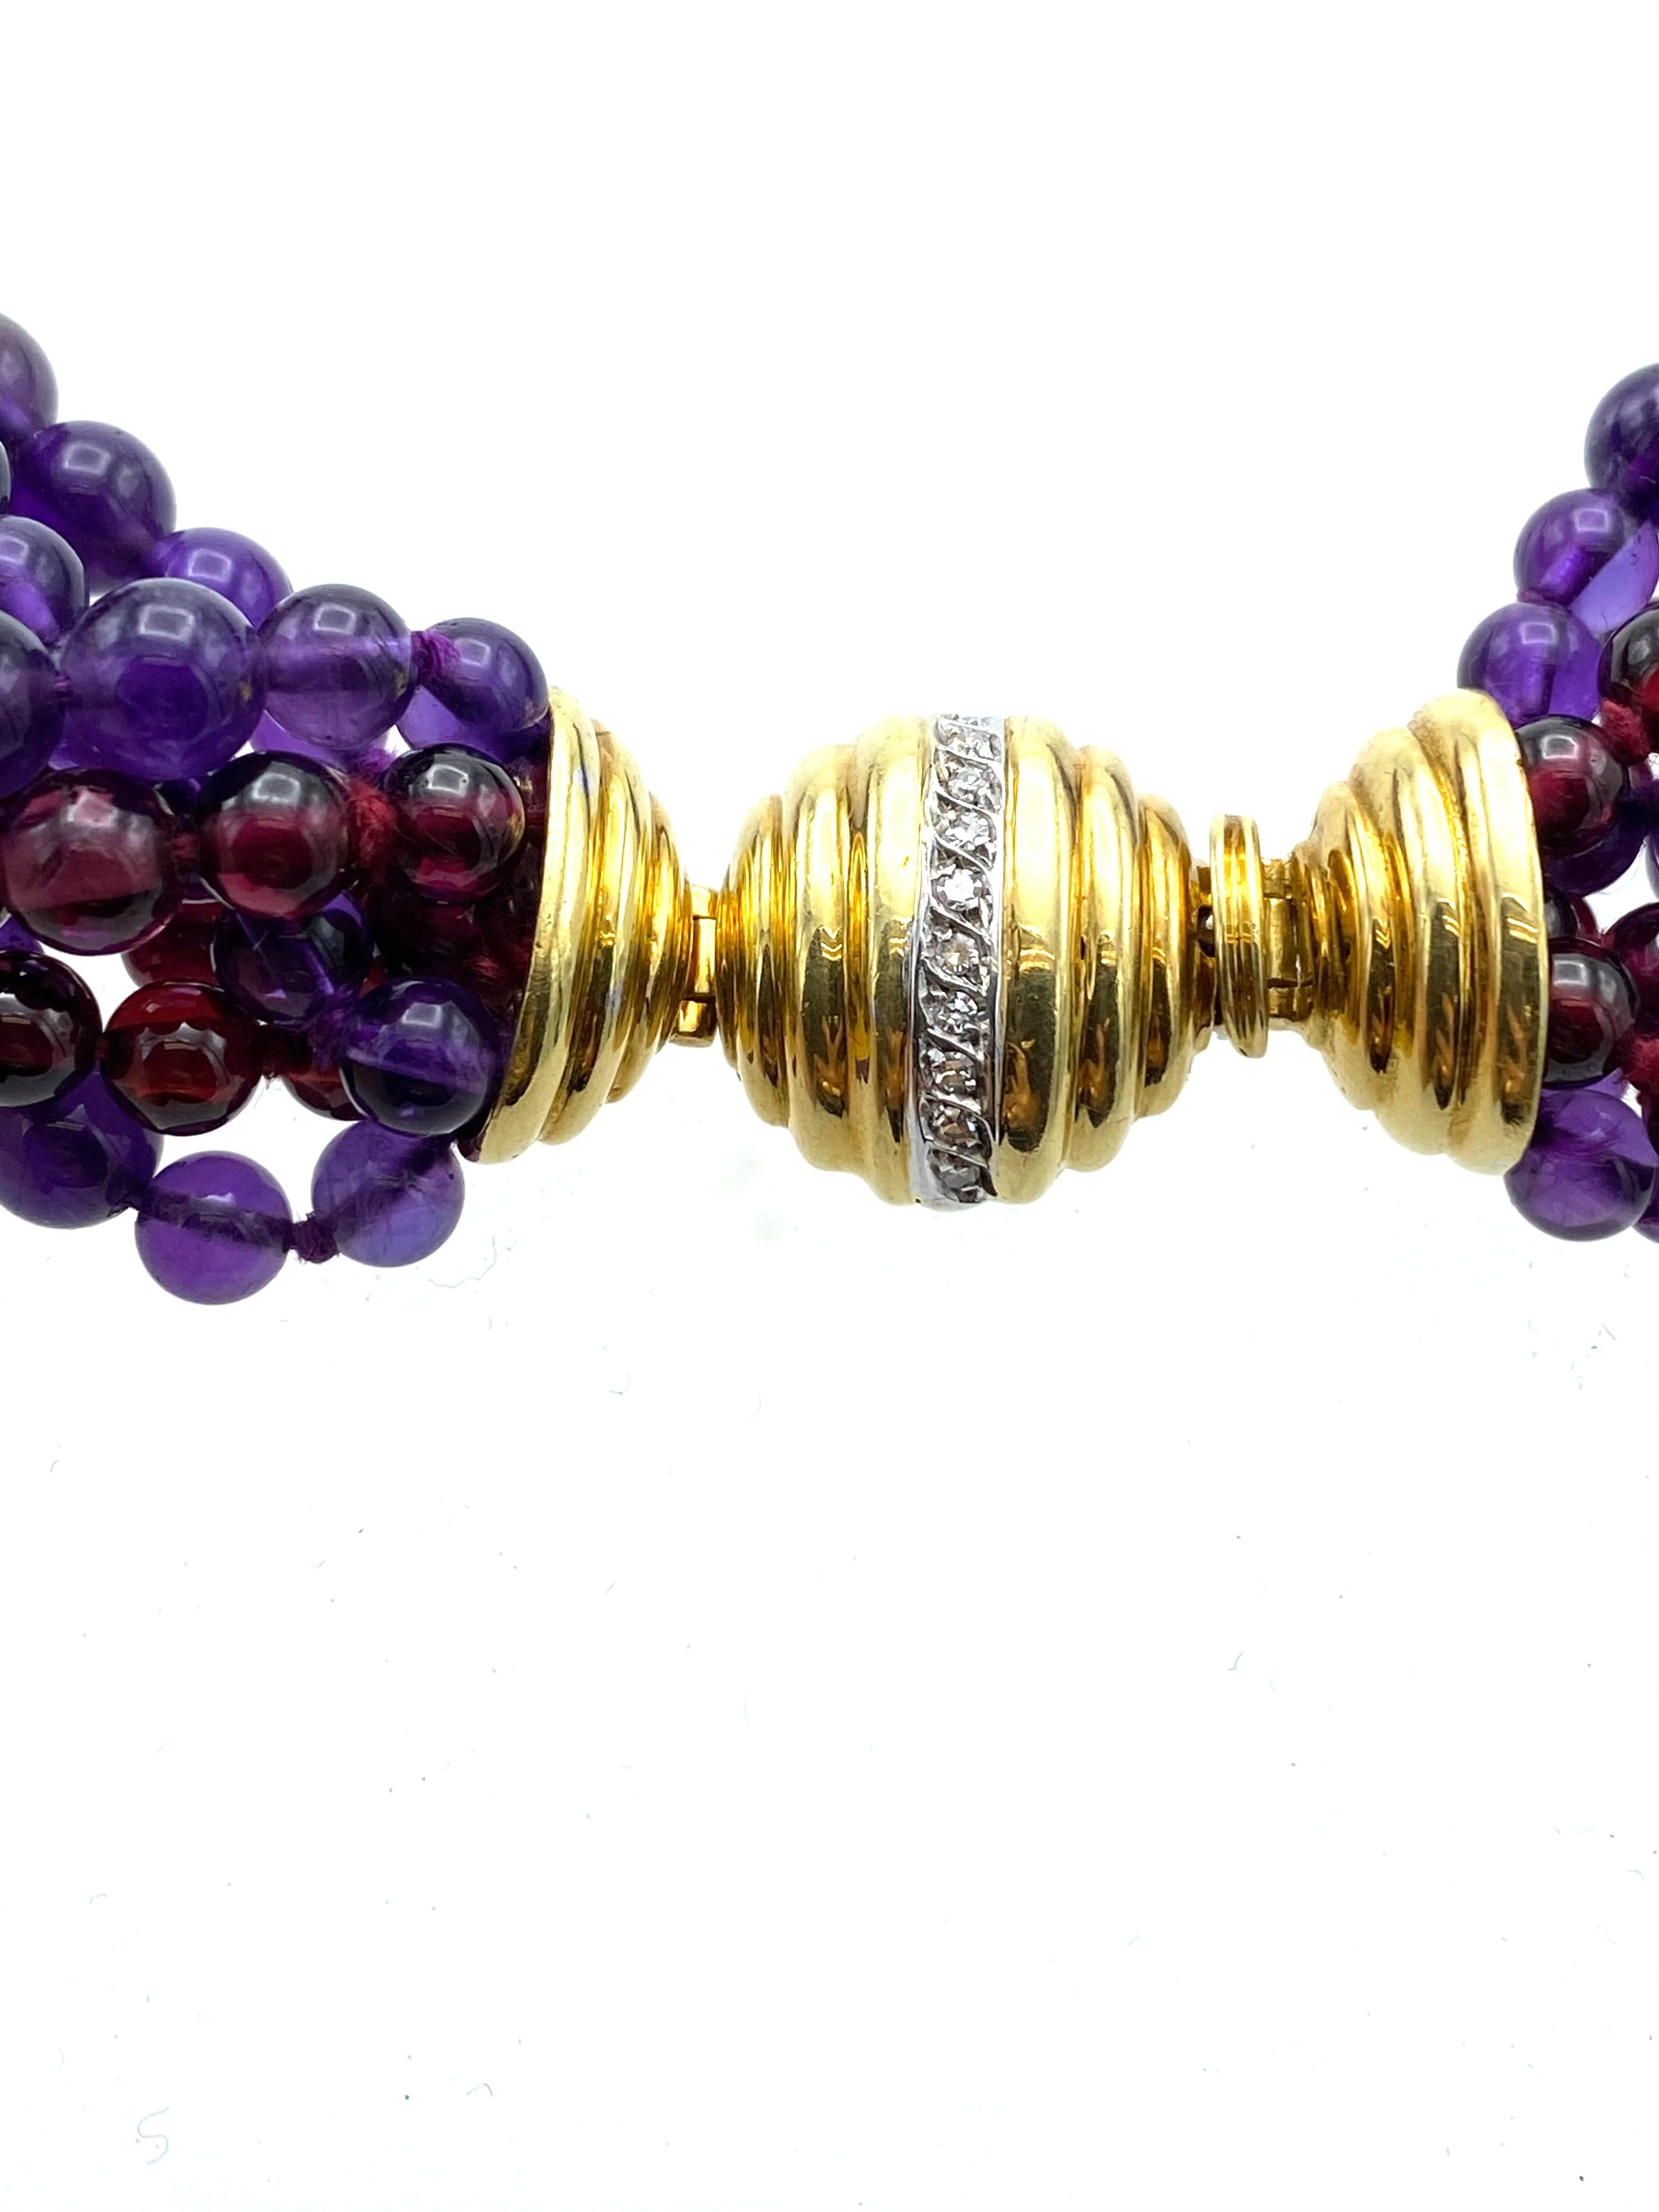 Product details:
Designed in 1980's by Tiffany and Co. in Italy.
Featuring 18K Yellow gold with 0.11 points of single cut diamonds box in clasp.
Total of eight strands of beads, four strands of amethyst and four strands of garnet, the beads measure